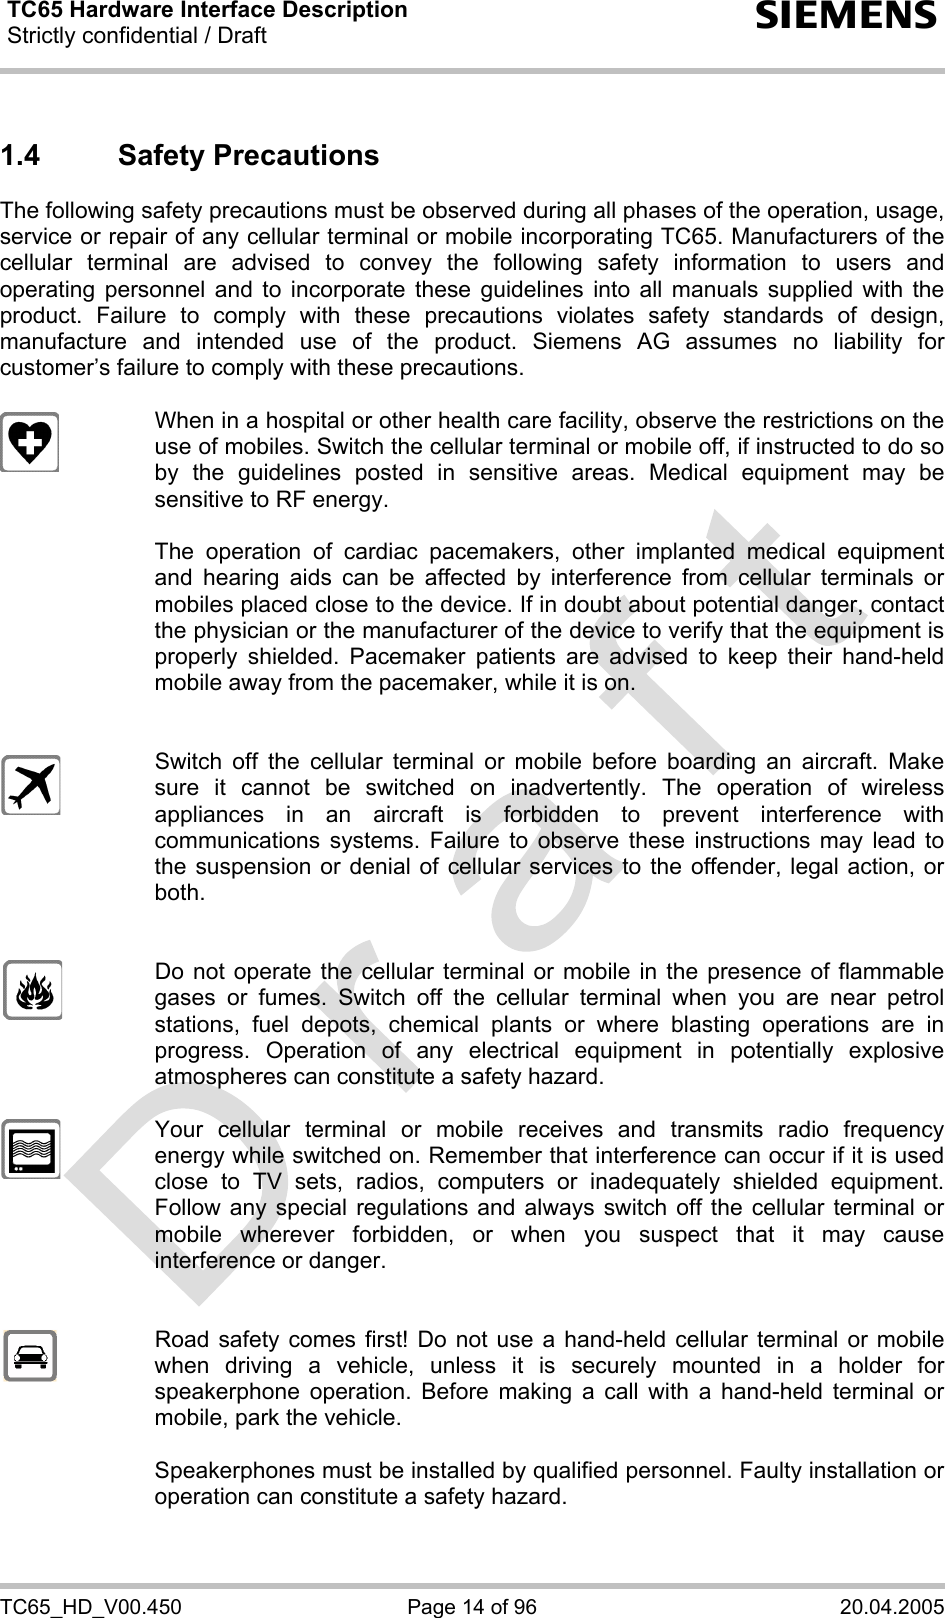 TC65 Hardware Interface Description Strictly confidential / Draft  s TC65_HD_V00.450  Page 14 of 96  20.04.2005 1.4 Safety Precautions The following safety precautions must be observed during all phases of the operation, usage, service or repair of any cellular terminal or mobile incorporating TC65. Manufacturers of the cellular terminal are advised to convey the following safety information to users and operating personnel and to incorporate these guidelines into all manuals supplied with the product. Failure to comply with these precautions violates safety standards of design, manufacture and intended use of the product. Siemens AG assumes no liability for customer’s failure to comply with these precautions.    When in a hospital or other health care facility, observe the restrictions on the use of mobiles. Switch the cellular terminal or mobile off, if instructed to do so by the guidelines posted in sensitive areas. Medical equipment may be sensitive to RF energy.   The operation of cardiac pacemakers, other implanted medical equipment and hearing aids can be affected by interference from cellular terminals or mobiles placed close to the device. If in doubt about potential danger, contact the physician or the manufacturer of the device to verify that the equipment is properly shielded. Pacemaker patients are advised to keep their hand-held mobile away from the pacemaker, while it is on.      Switch off the cellular terminal or mobile before boarding an aircraft. Make sure it cannot be switched on inadvertently. The operation of wireless appliances in an aircraft is forbidden to prevent interference with communications systems. Failure to observe these instructions may lead to the suspension or denial of cellular services to the offender, legal action, or both.     Do not operate the cellular terminal or mobile in the presence of flammable gases or fumes. Switch off the cellular terminal when you are near petrol stations, fuel depots, chemical plants or where blasting operations are in progress. Operation of any electrical equipment in potentially explosive atmospheres can constitute a safety hazard.    Your cellular terminal or mobile receives and transmits radio frequency energy while switched on. Remember that interference can occur if it is used close to TV sets, radios, computers or inadequately shielded equipment. Follow any special regulations and always switch off the cellular terminal or mobile wherever forbidden, or when you suspect that it may cause interference or danger.     Road safety comes first! Do not use a hand-held cellular terminal or mobile when driving a vehicle, unless it is securely mounted in a holder for speakerphone operation. Before making a call with a hand-held terminal or mobile, park the vehicle.   Speakerphones must be installed by qualified personnel. Faulty installation or operation can constitute a safety hazard.  